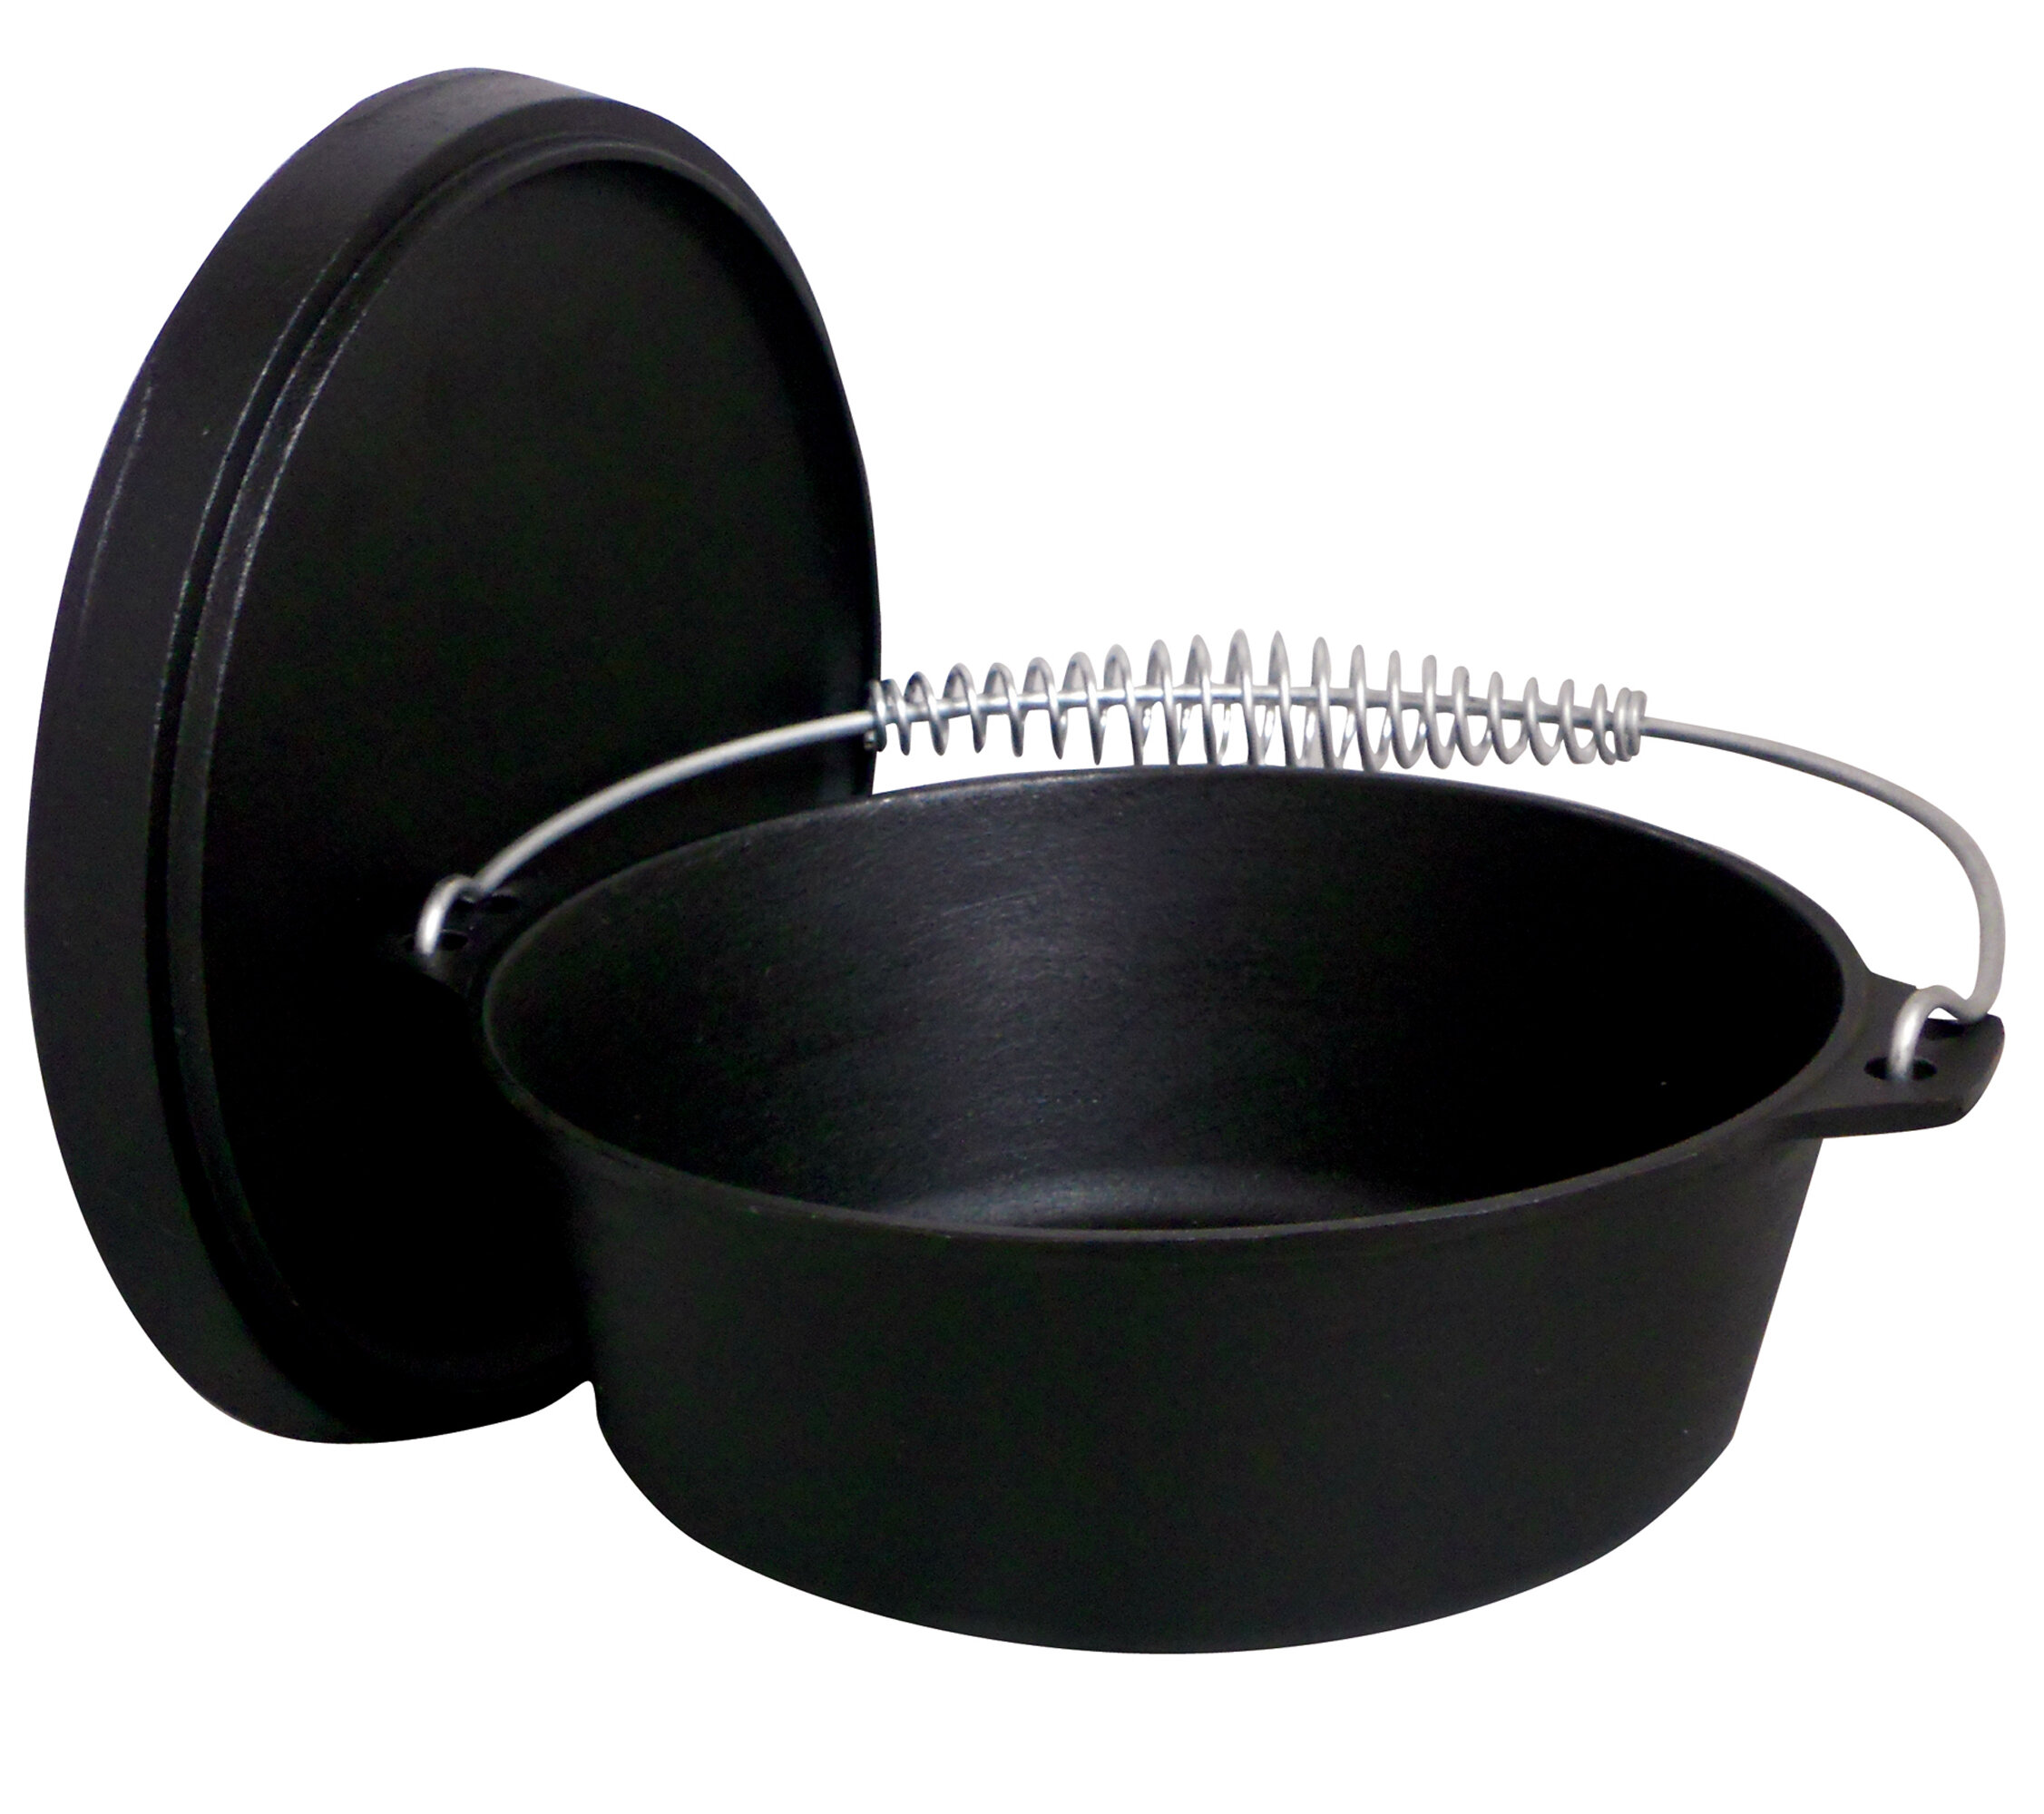 Cuisiland Large Heavy Duty Cast Iron Bread & Loaf Pan - A perfect